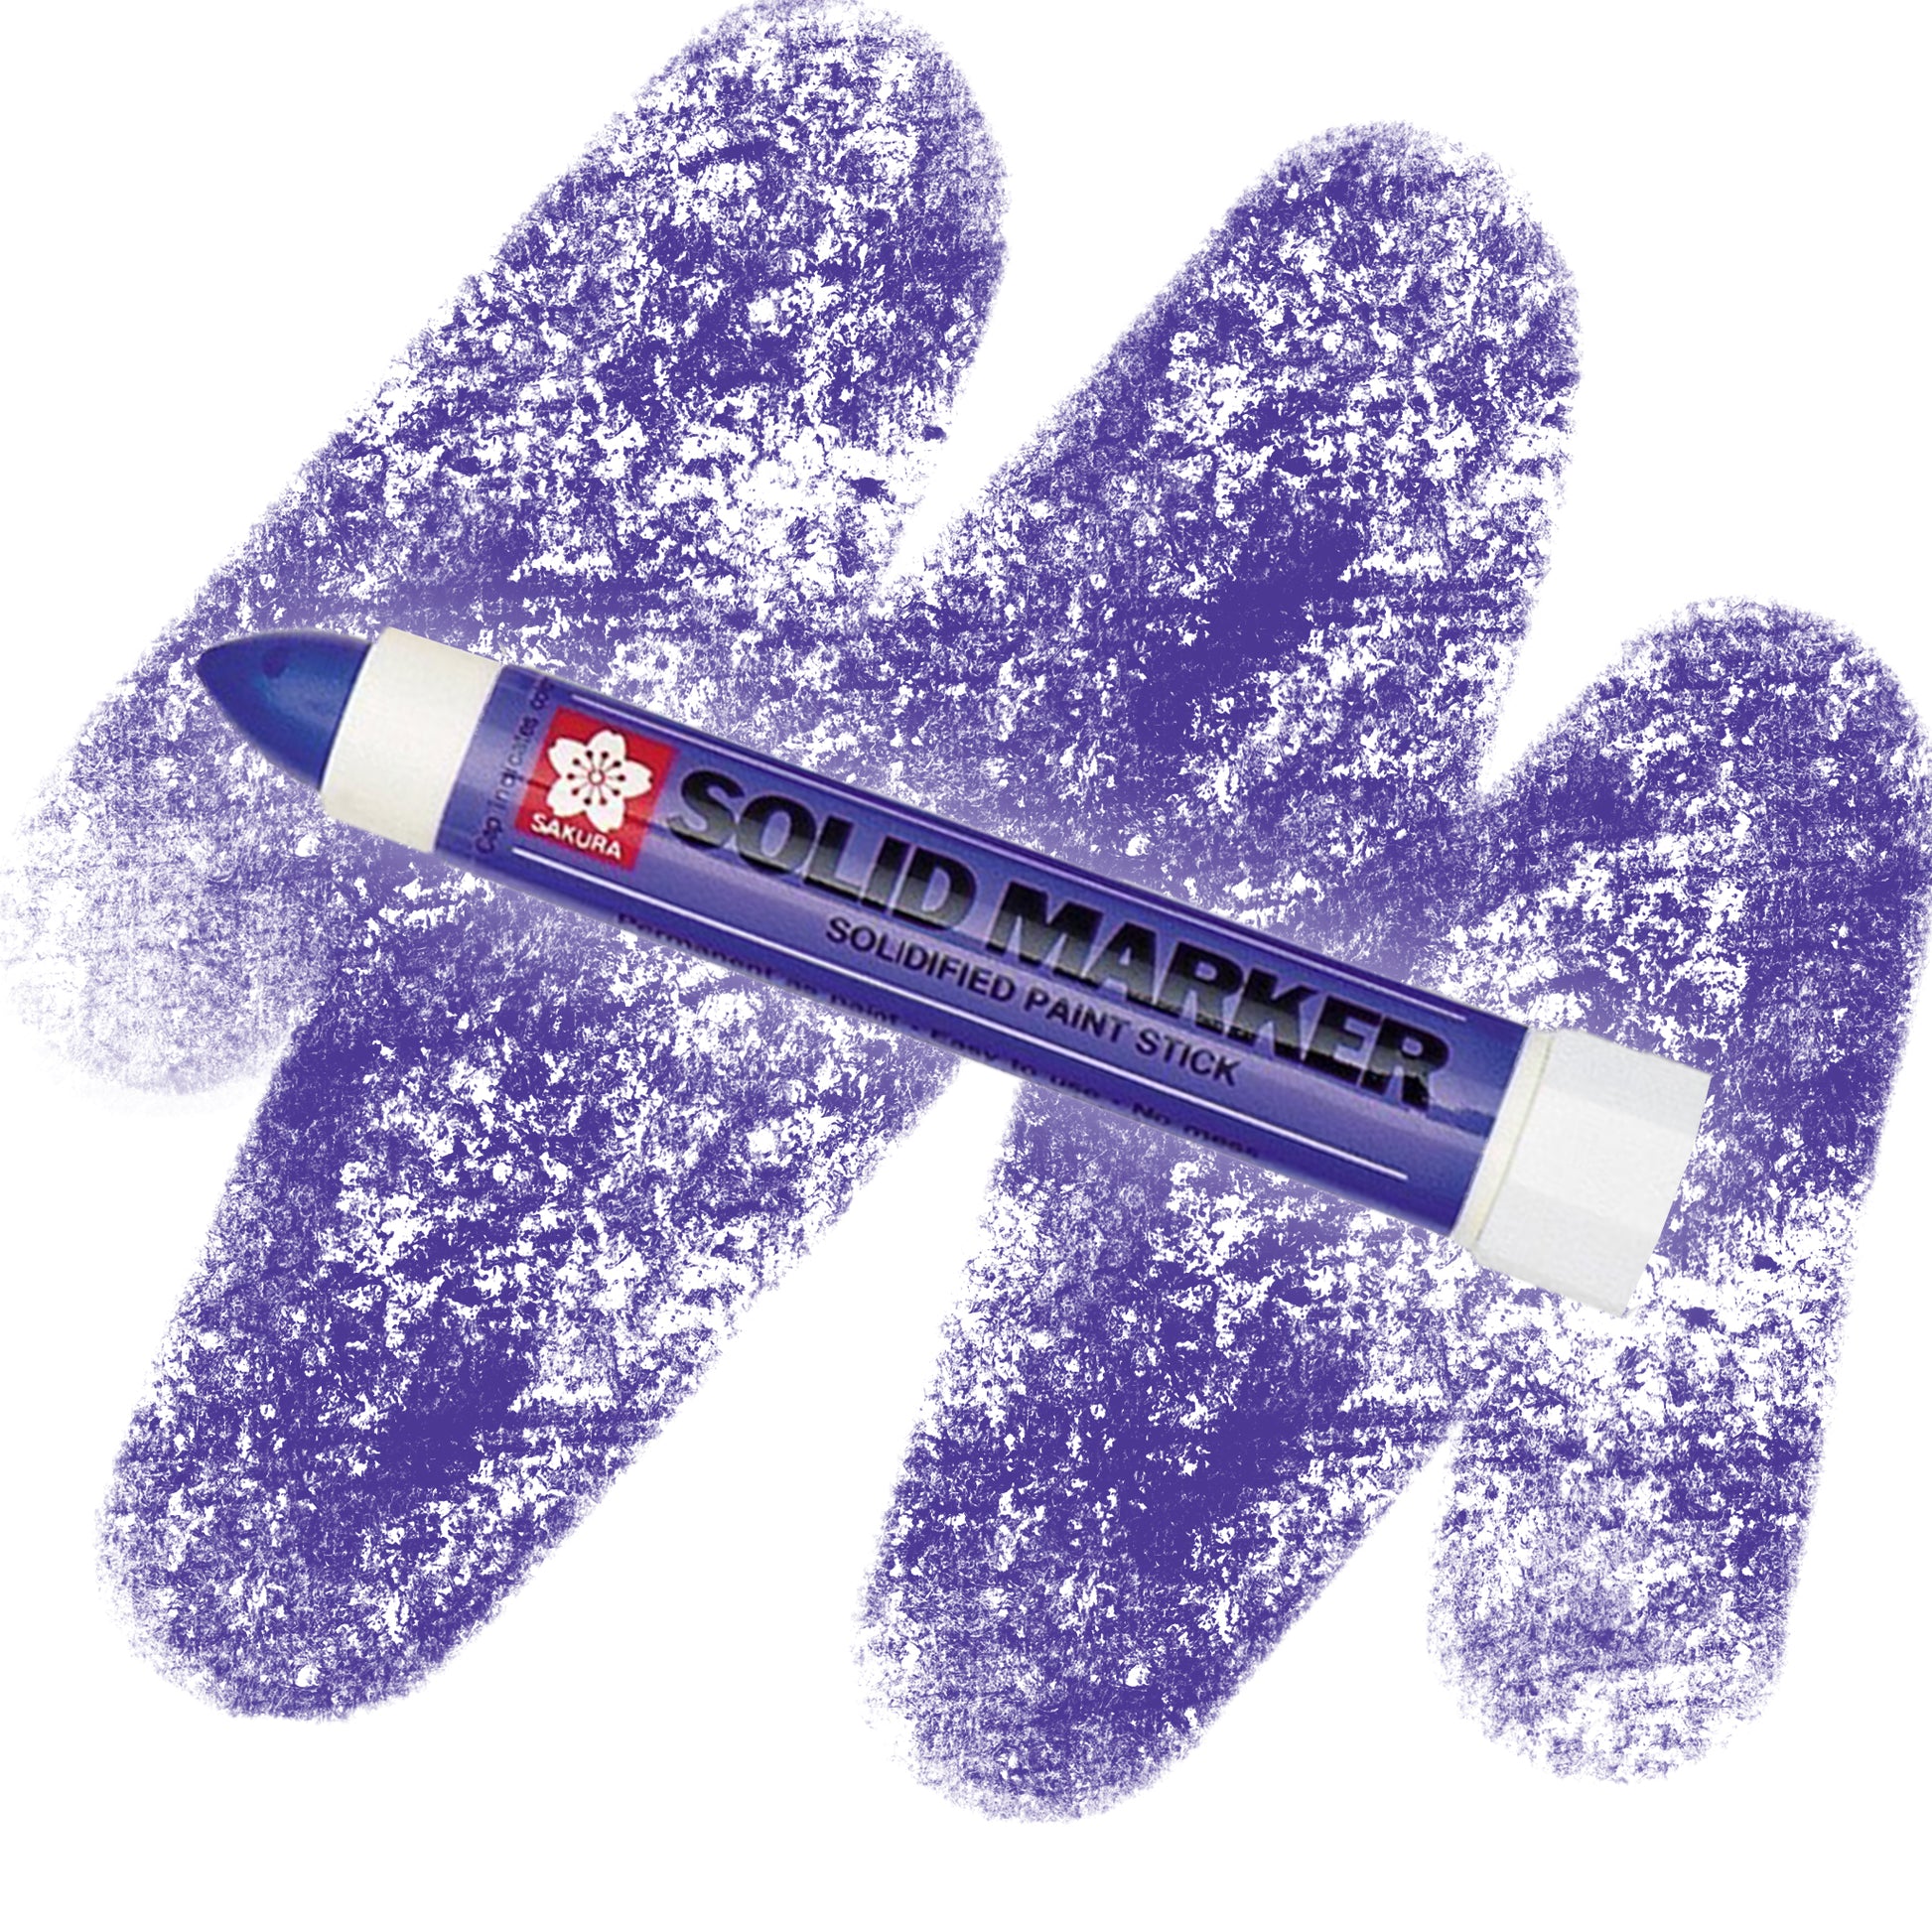 A purple marker with a purple label that reads " SOLID MARKER" with a purple crayon swatch.